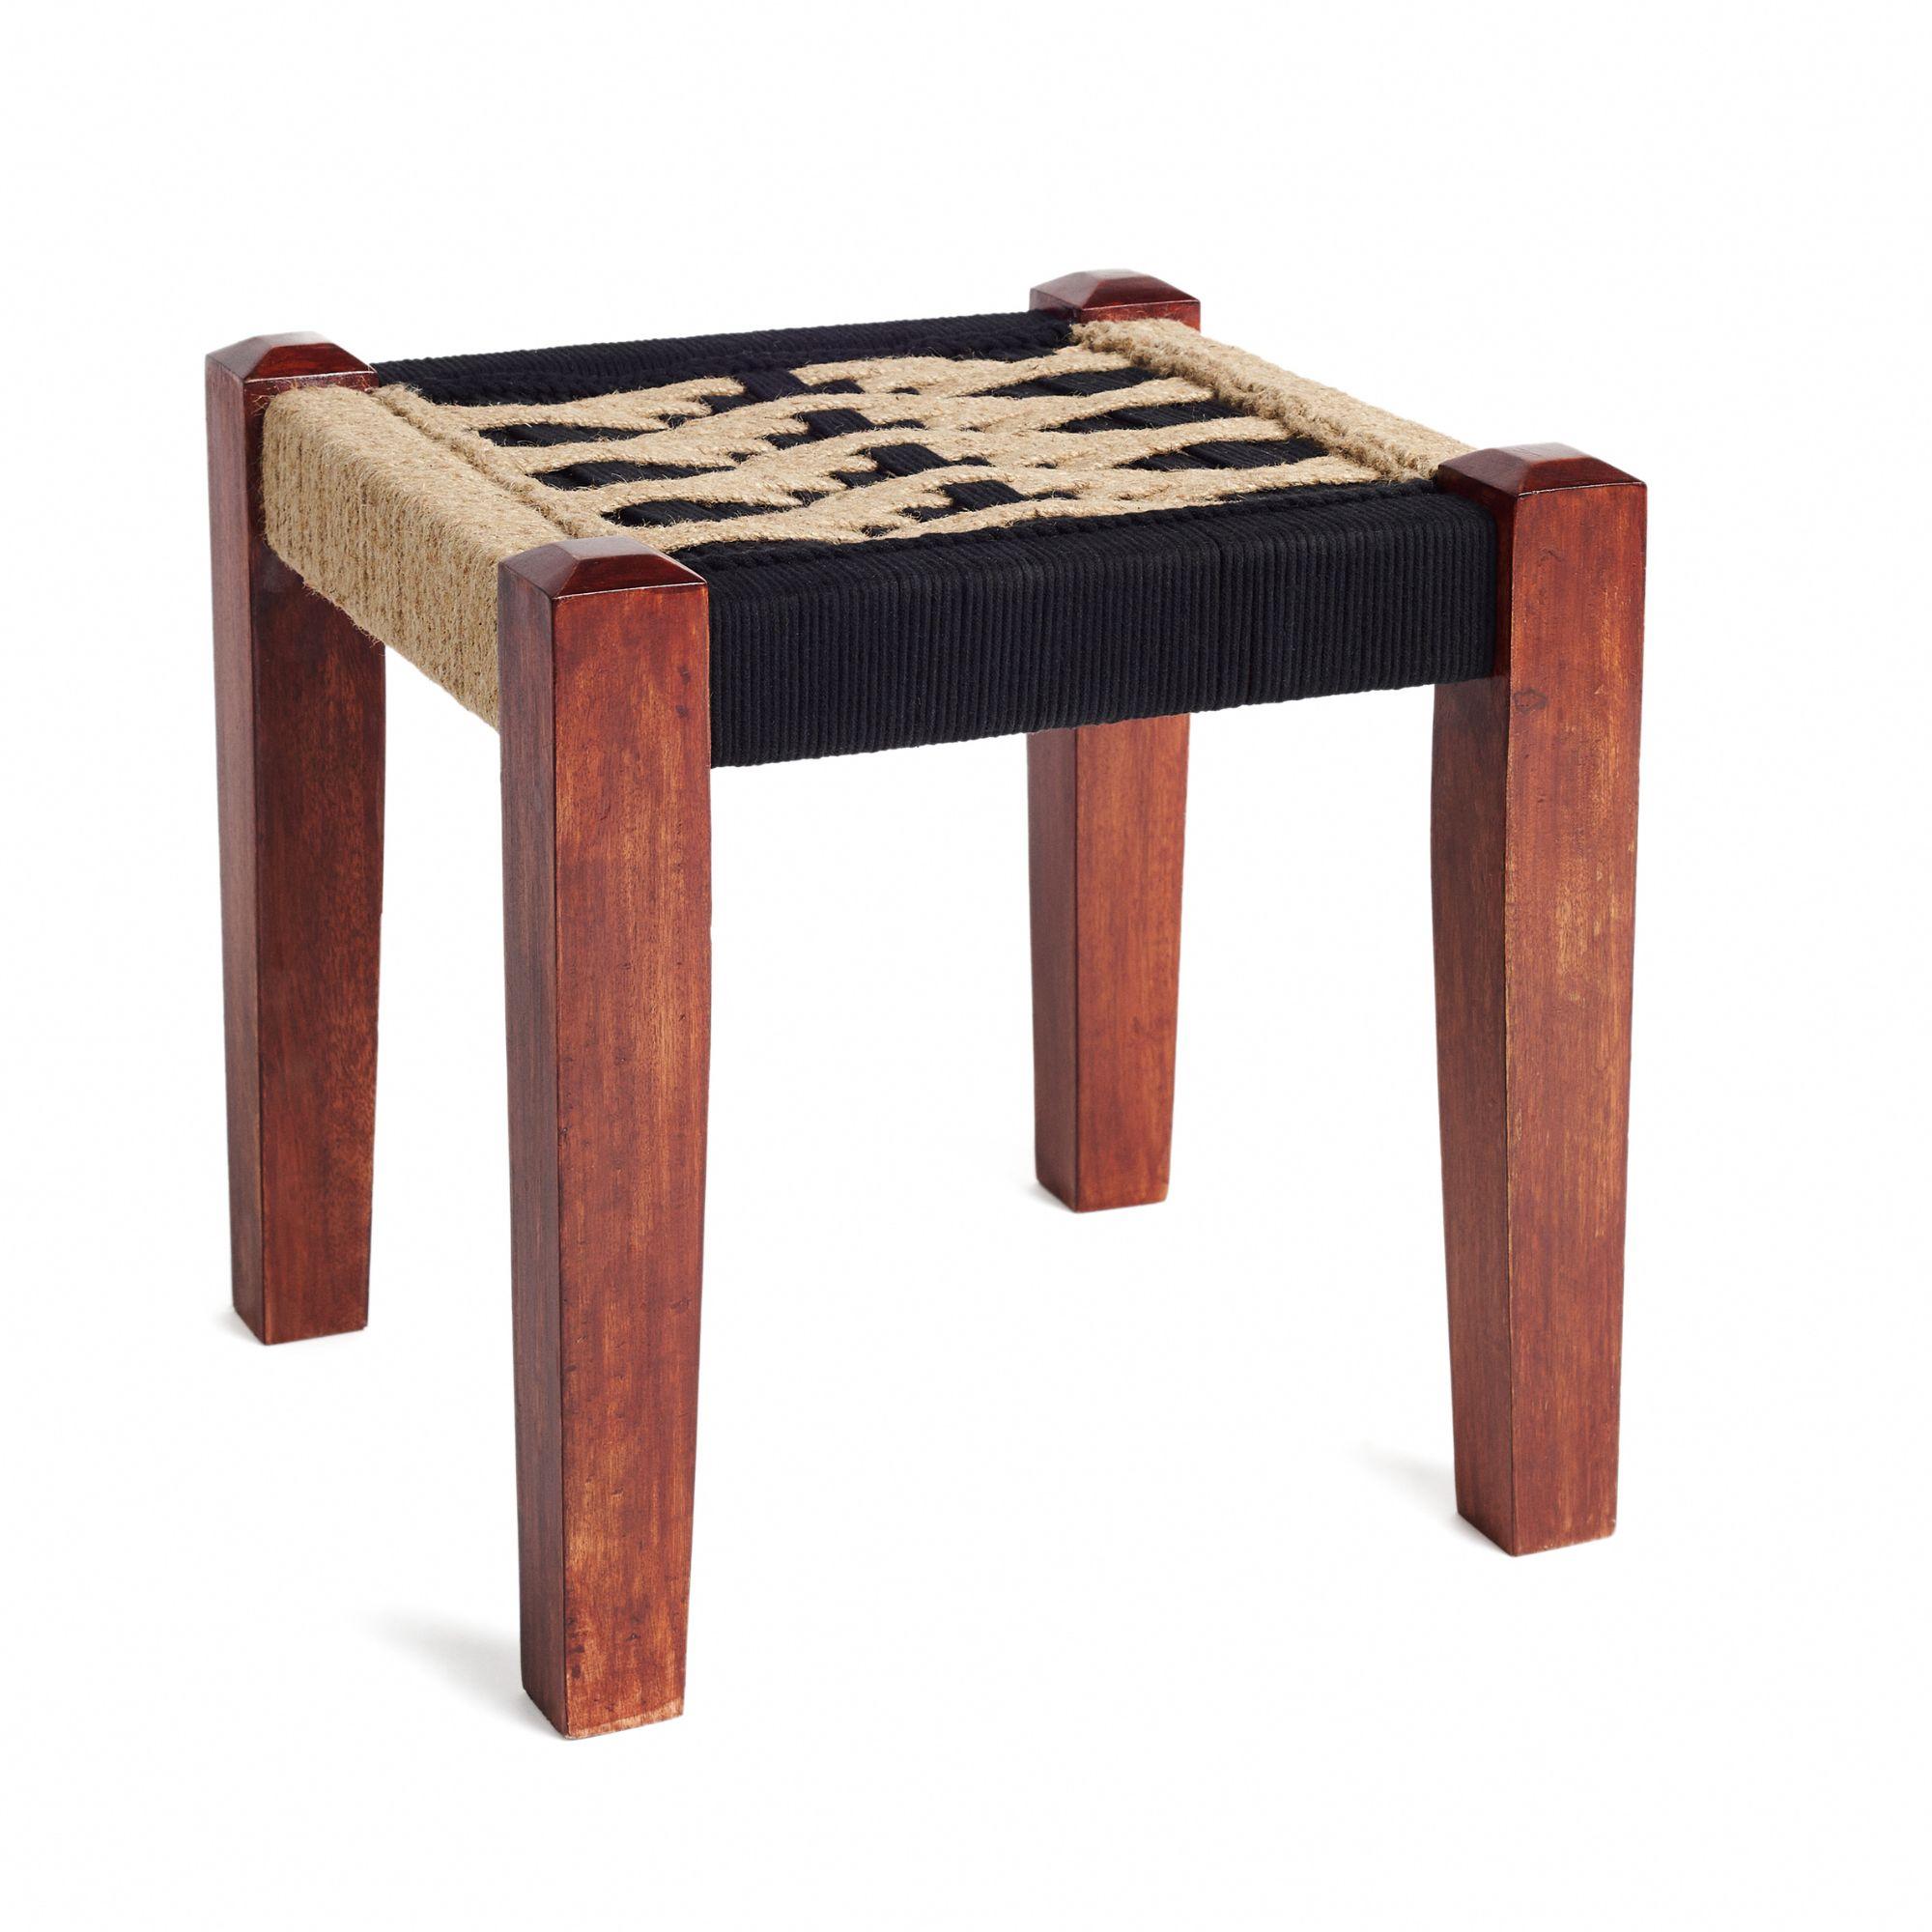 Alambh Black Stool is an artisanal creation made using natural fibers like jute and cotton. Carefully handwoven by women artisans with whom we are collaborating for a unique collaboration, this uses their skill of hand weaving to create unique